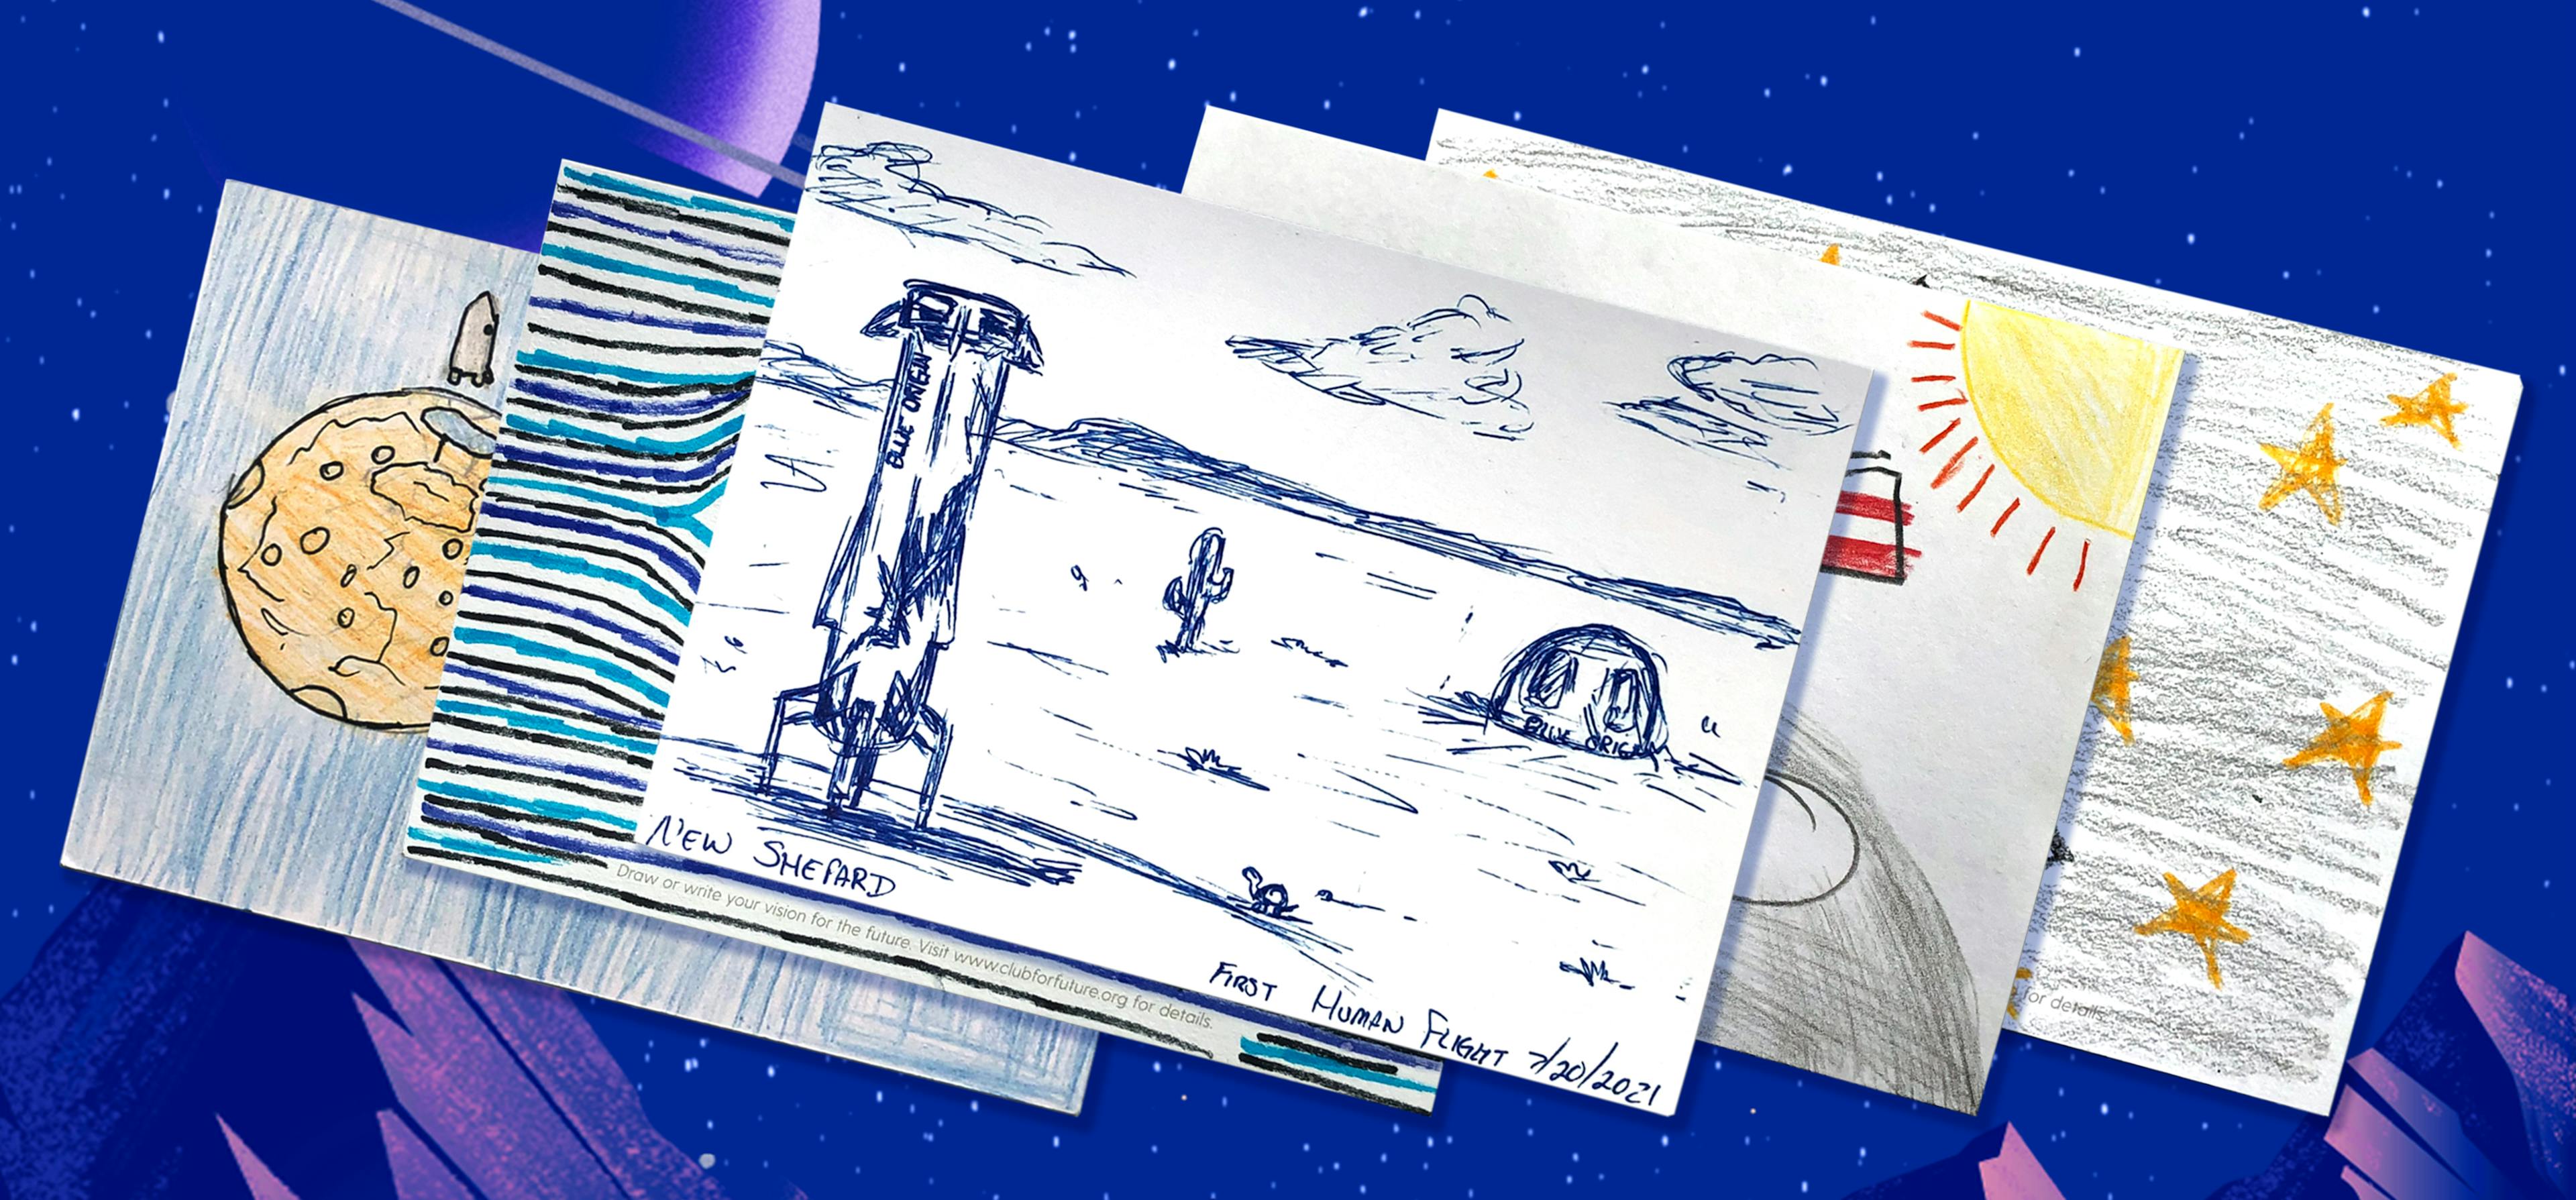 Sample postcards with space-related drawings